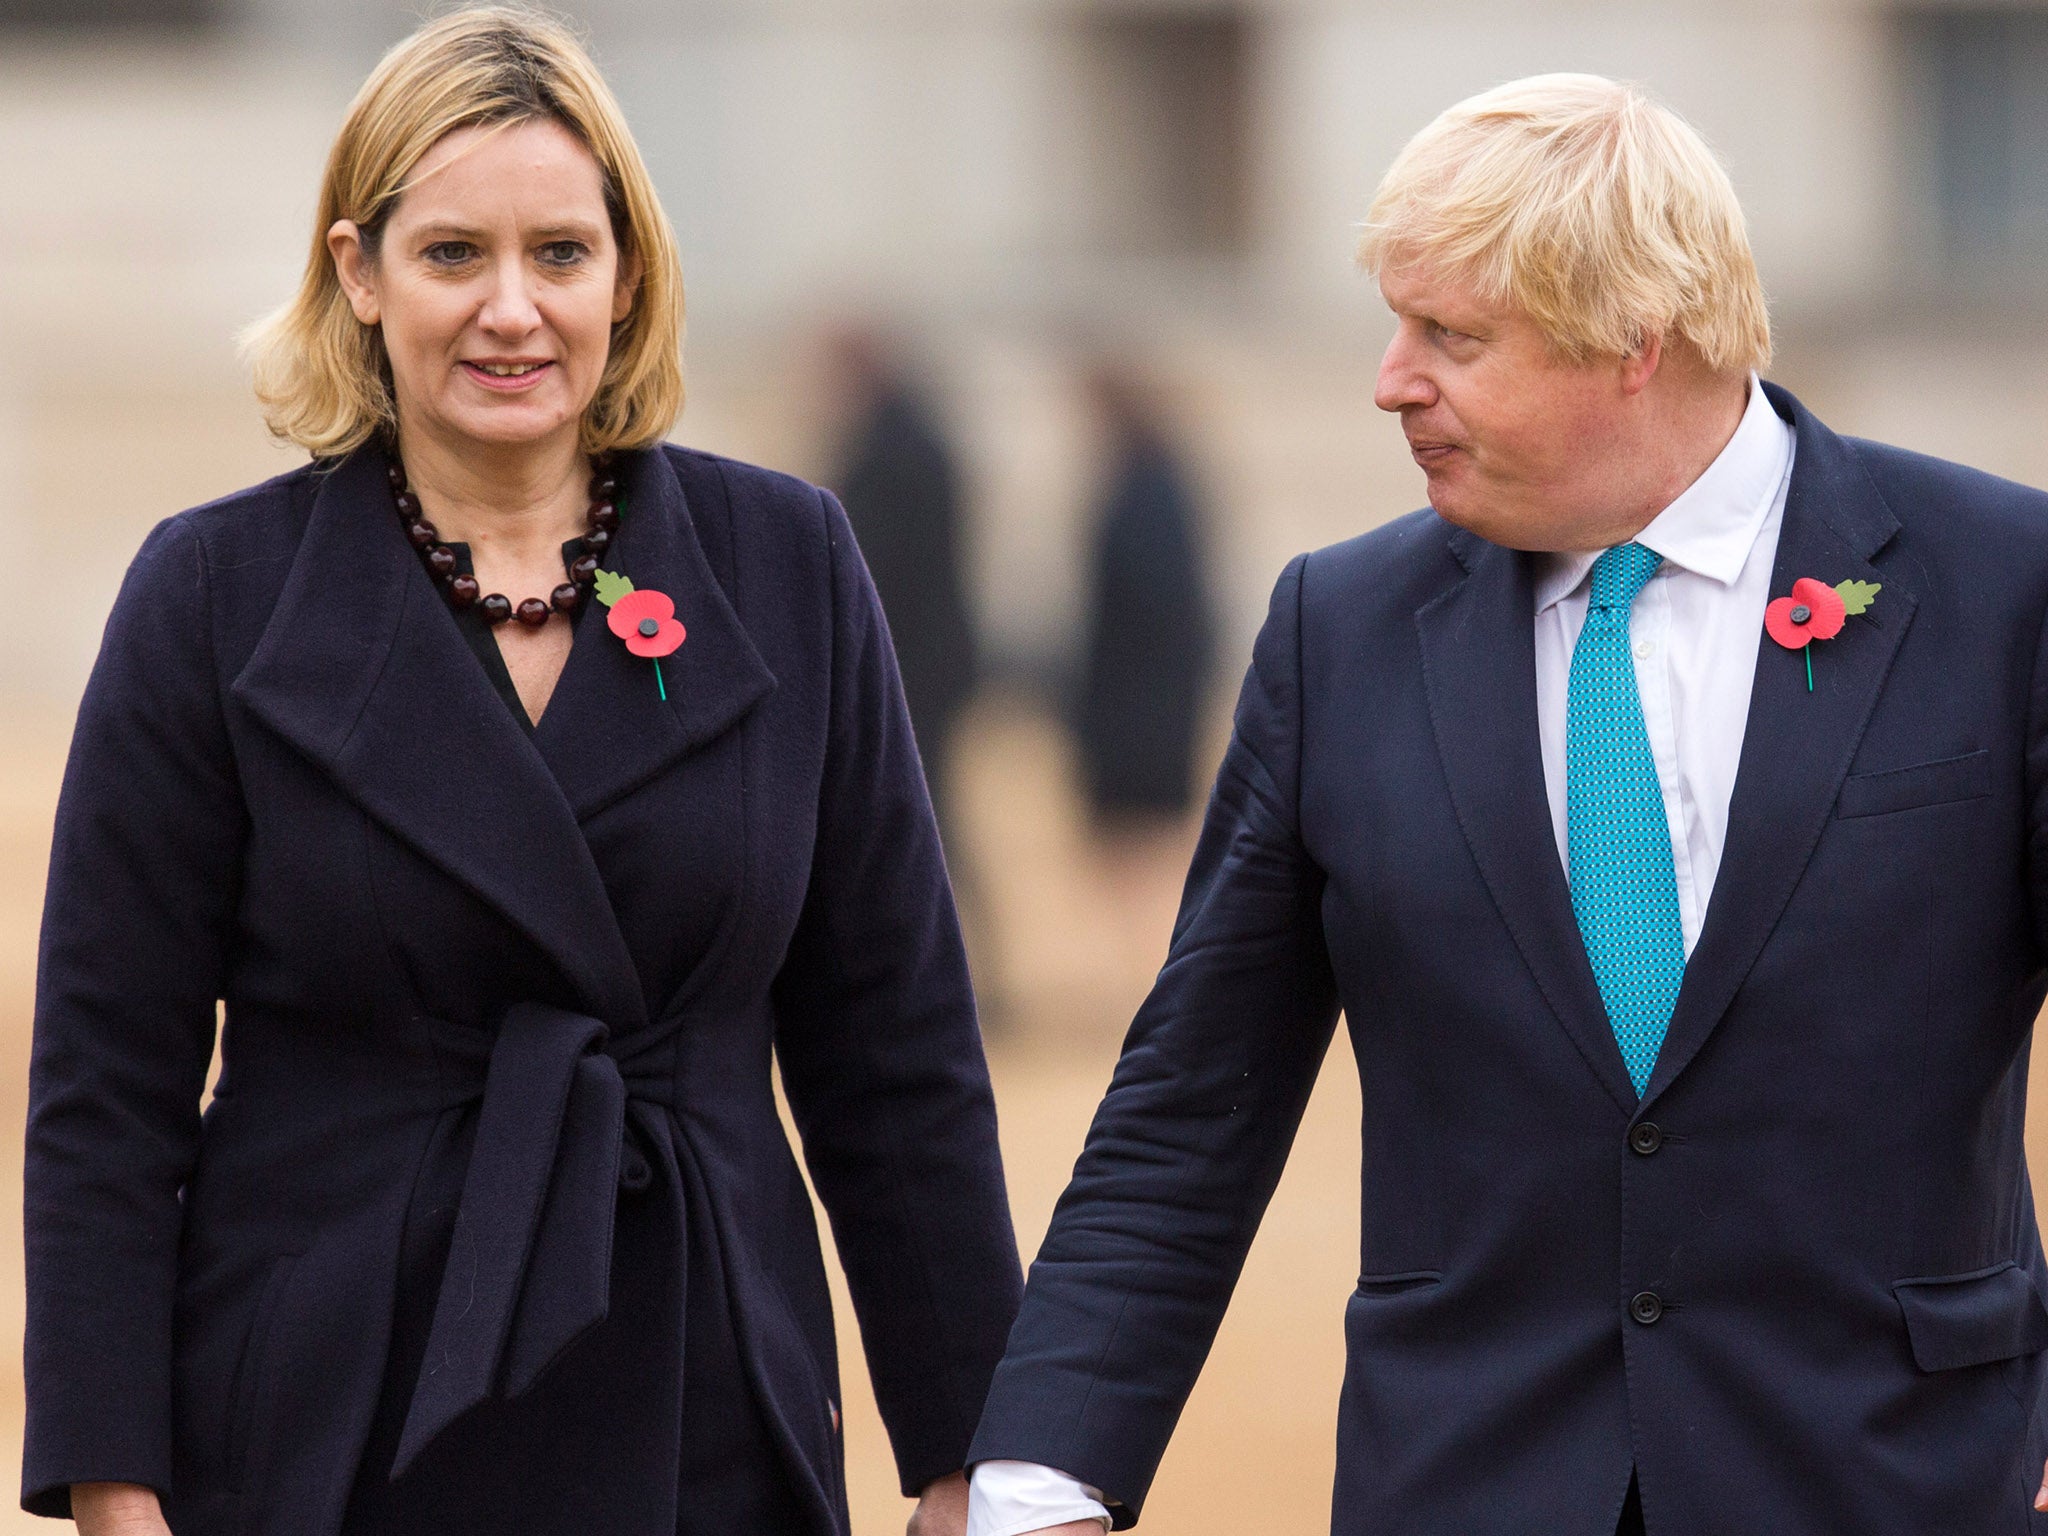 Home Secretary Amber Rudd and Foreign Secretary Boris Johnson leave the royal pavilion after attending the the Official Ceremonial Welcome for the Colombian State Visit at Horse Guards Parade